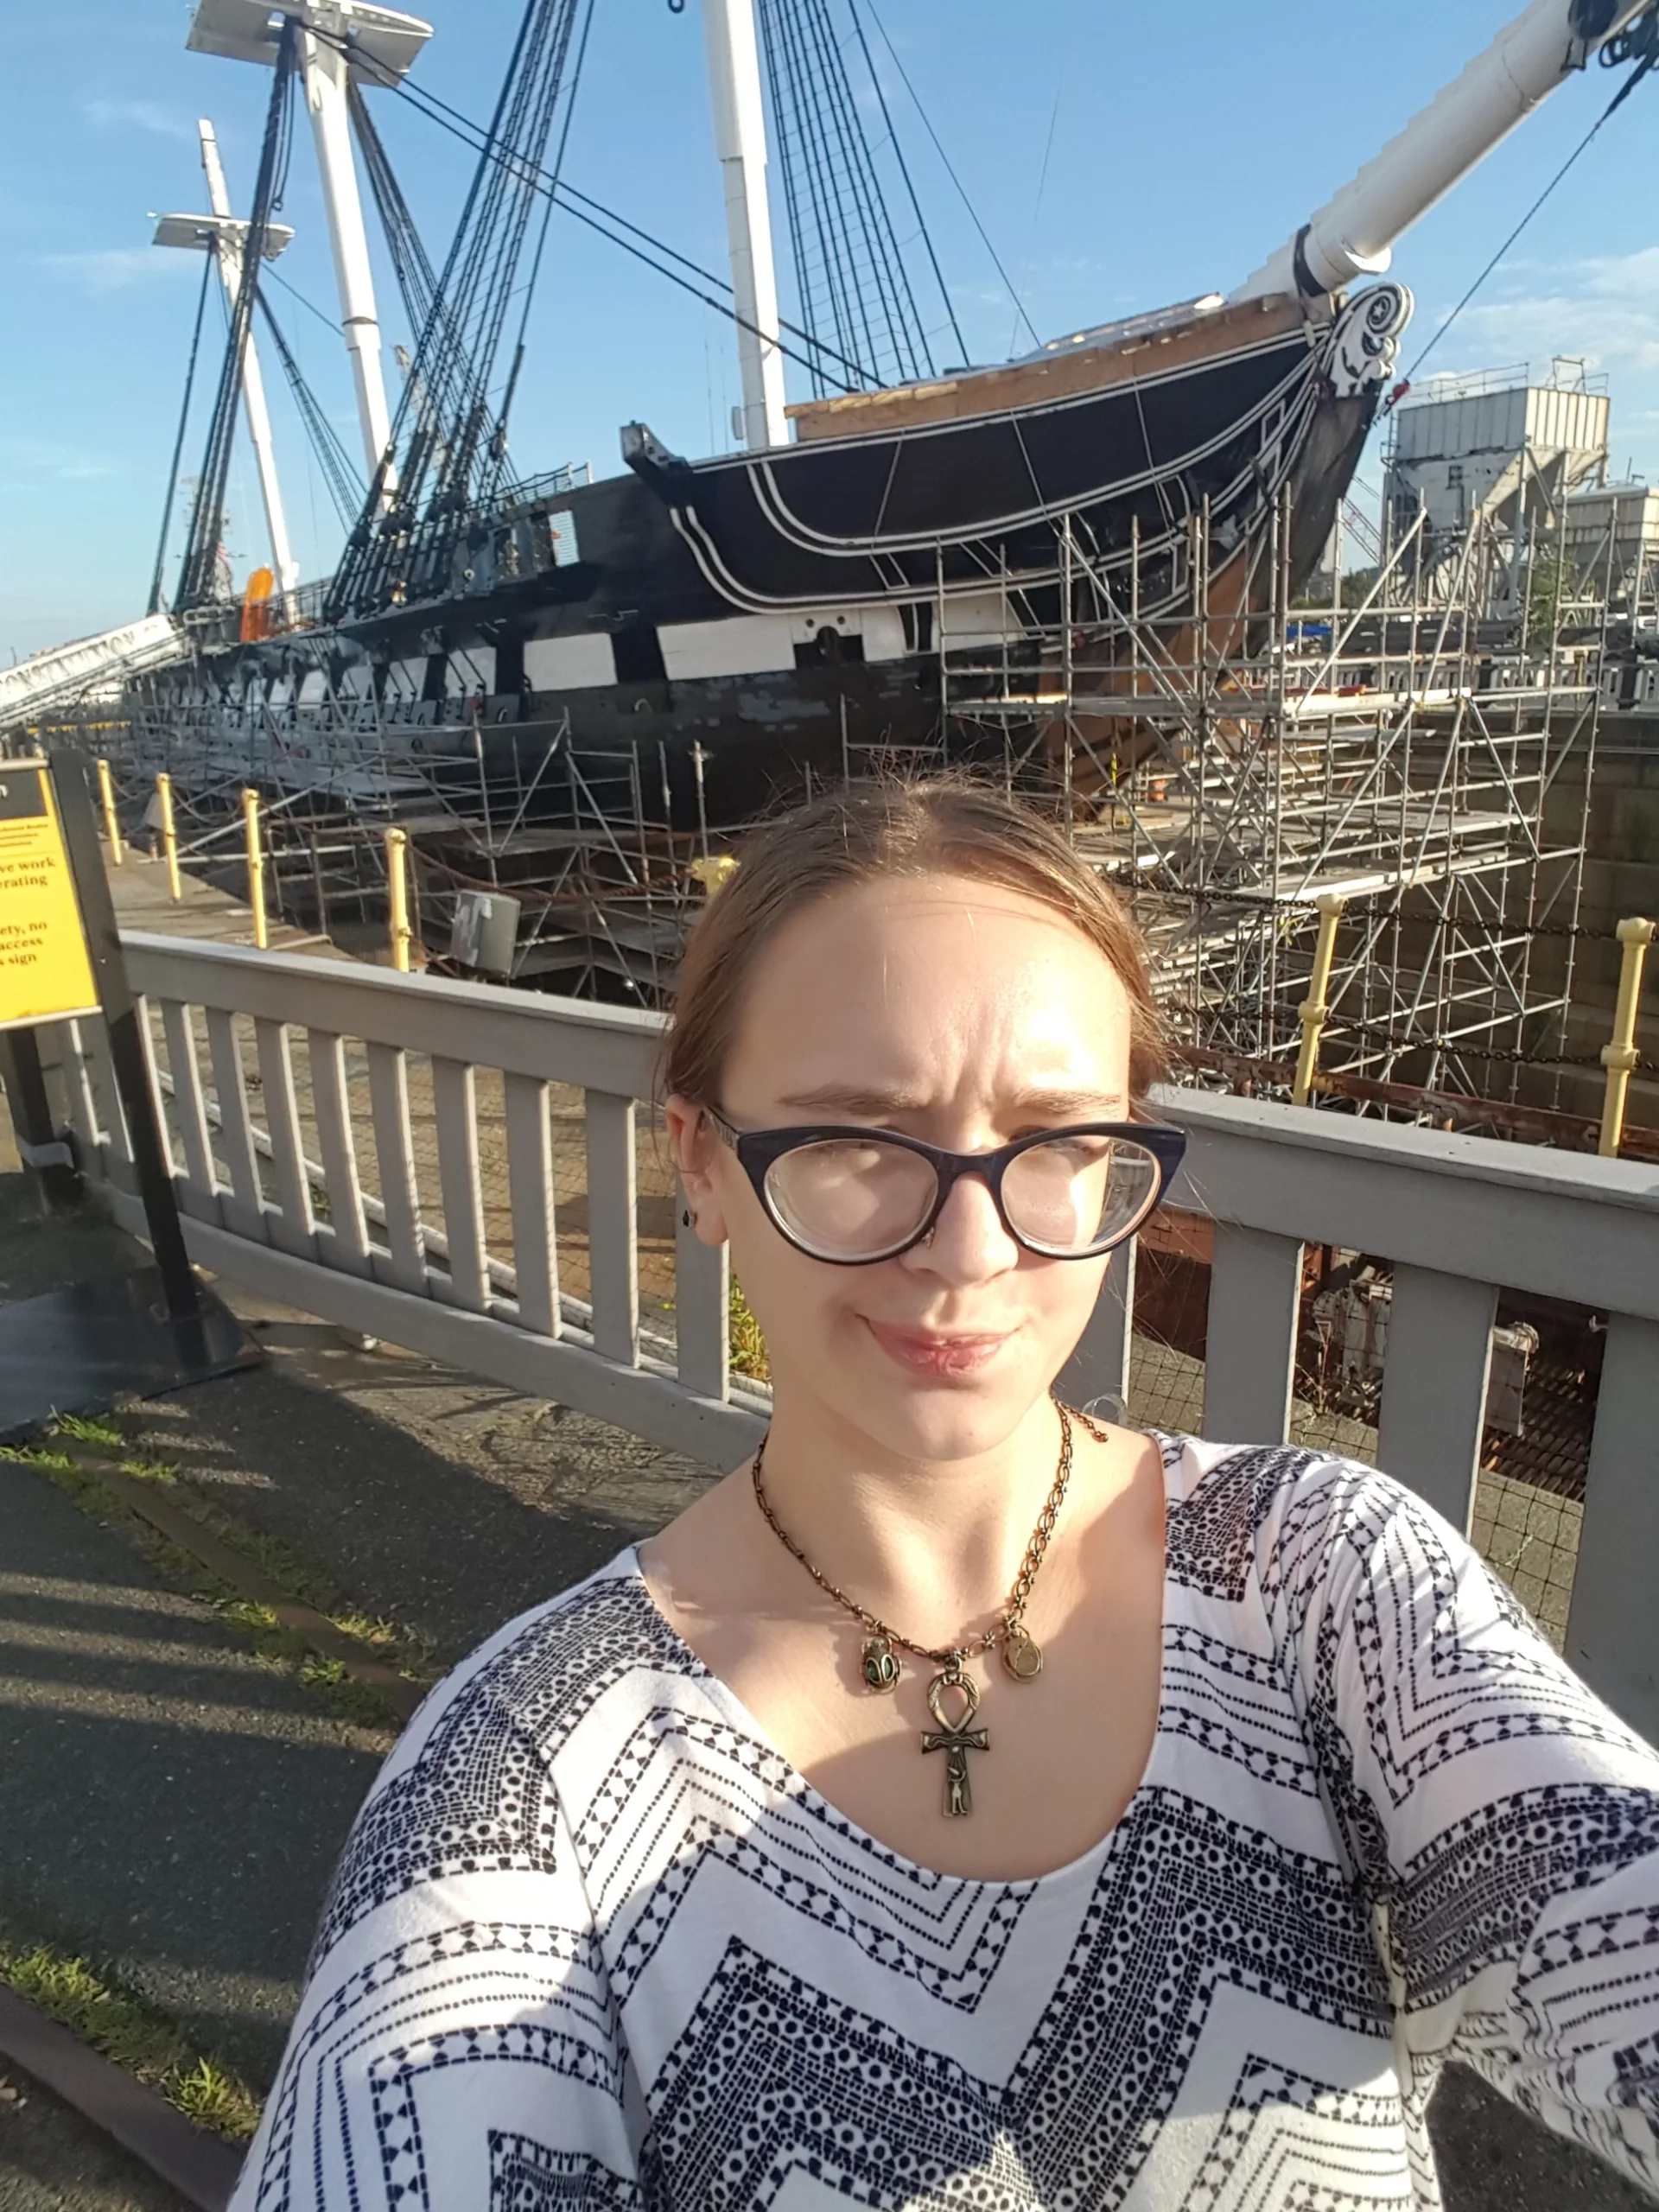 Zoe with the USS Constitution, Old Ironsides